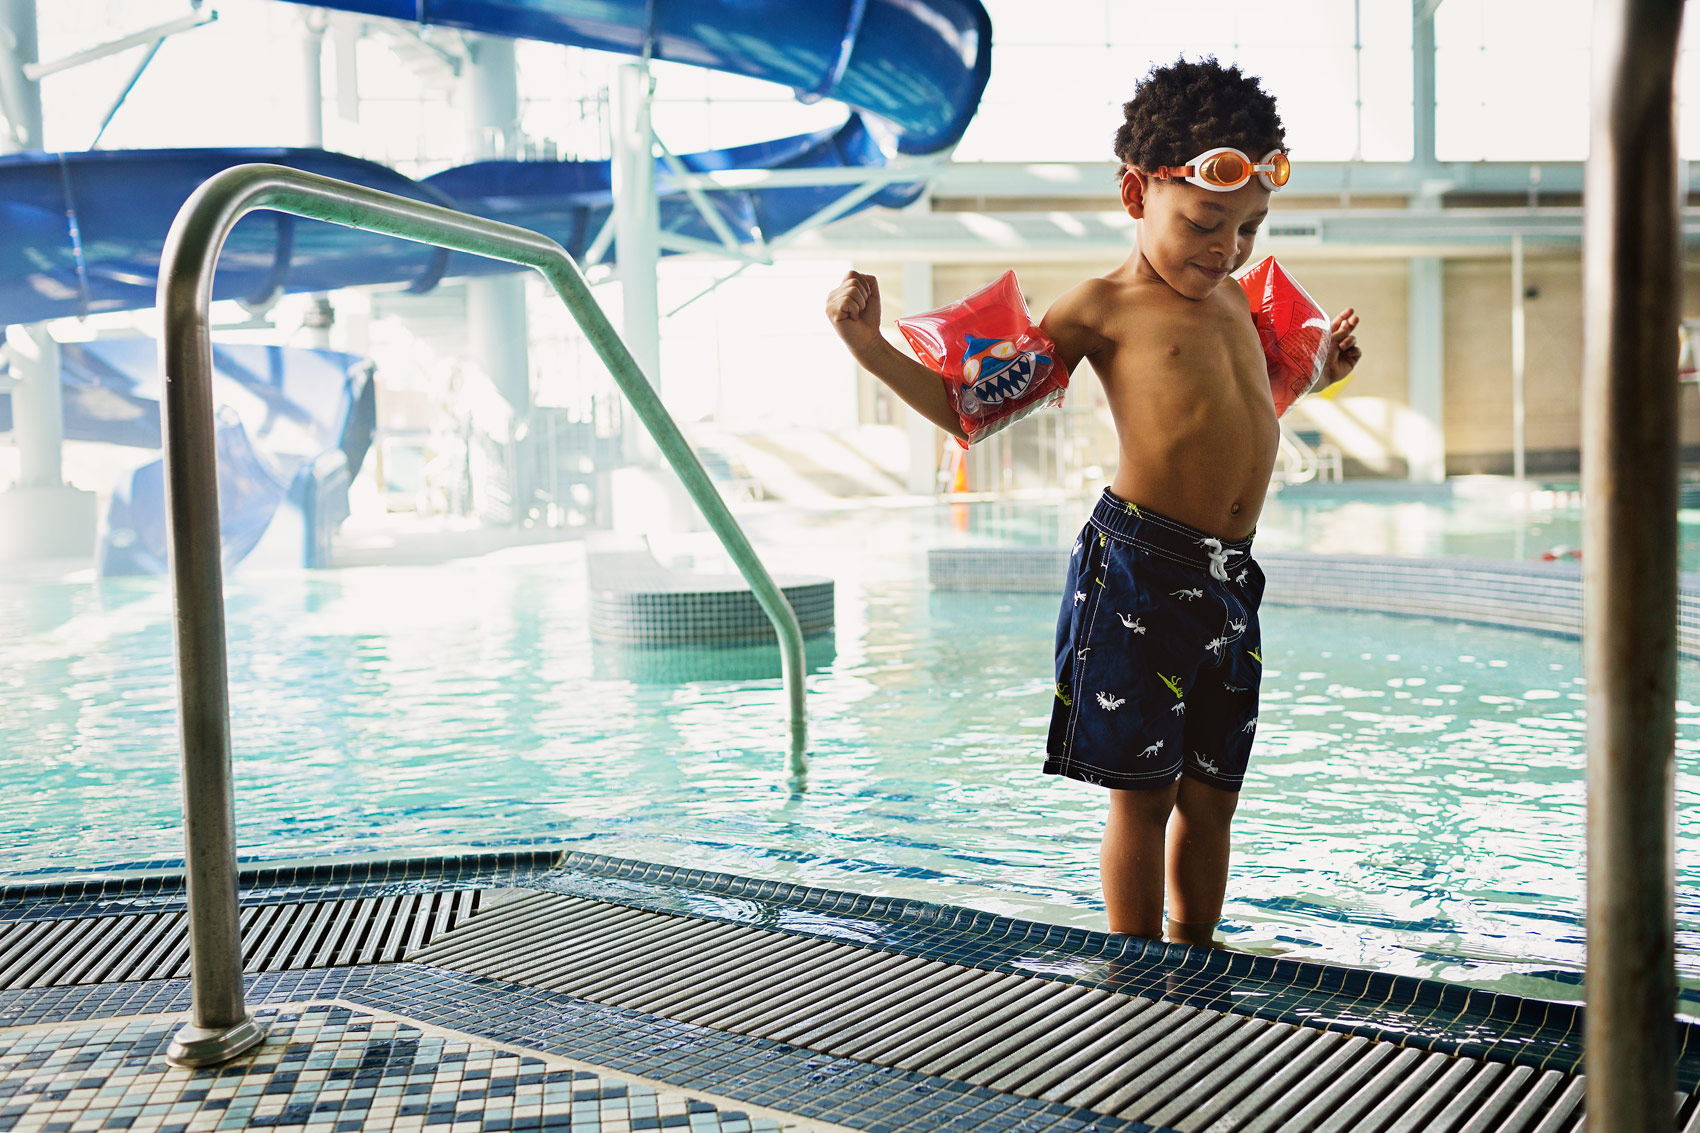 A young boy flexes his muscles with floaties on at a Washington, DC pool.